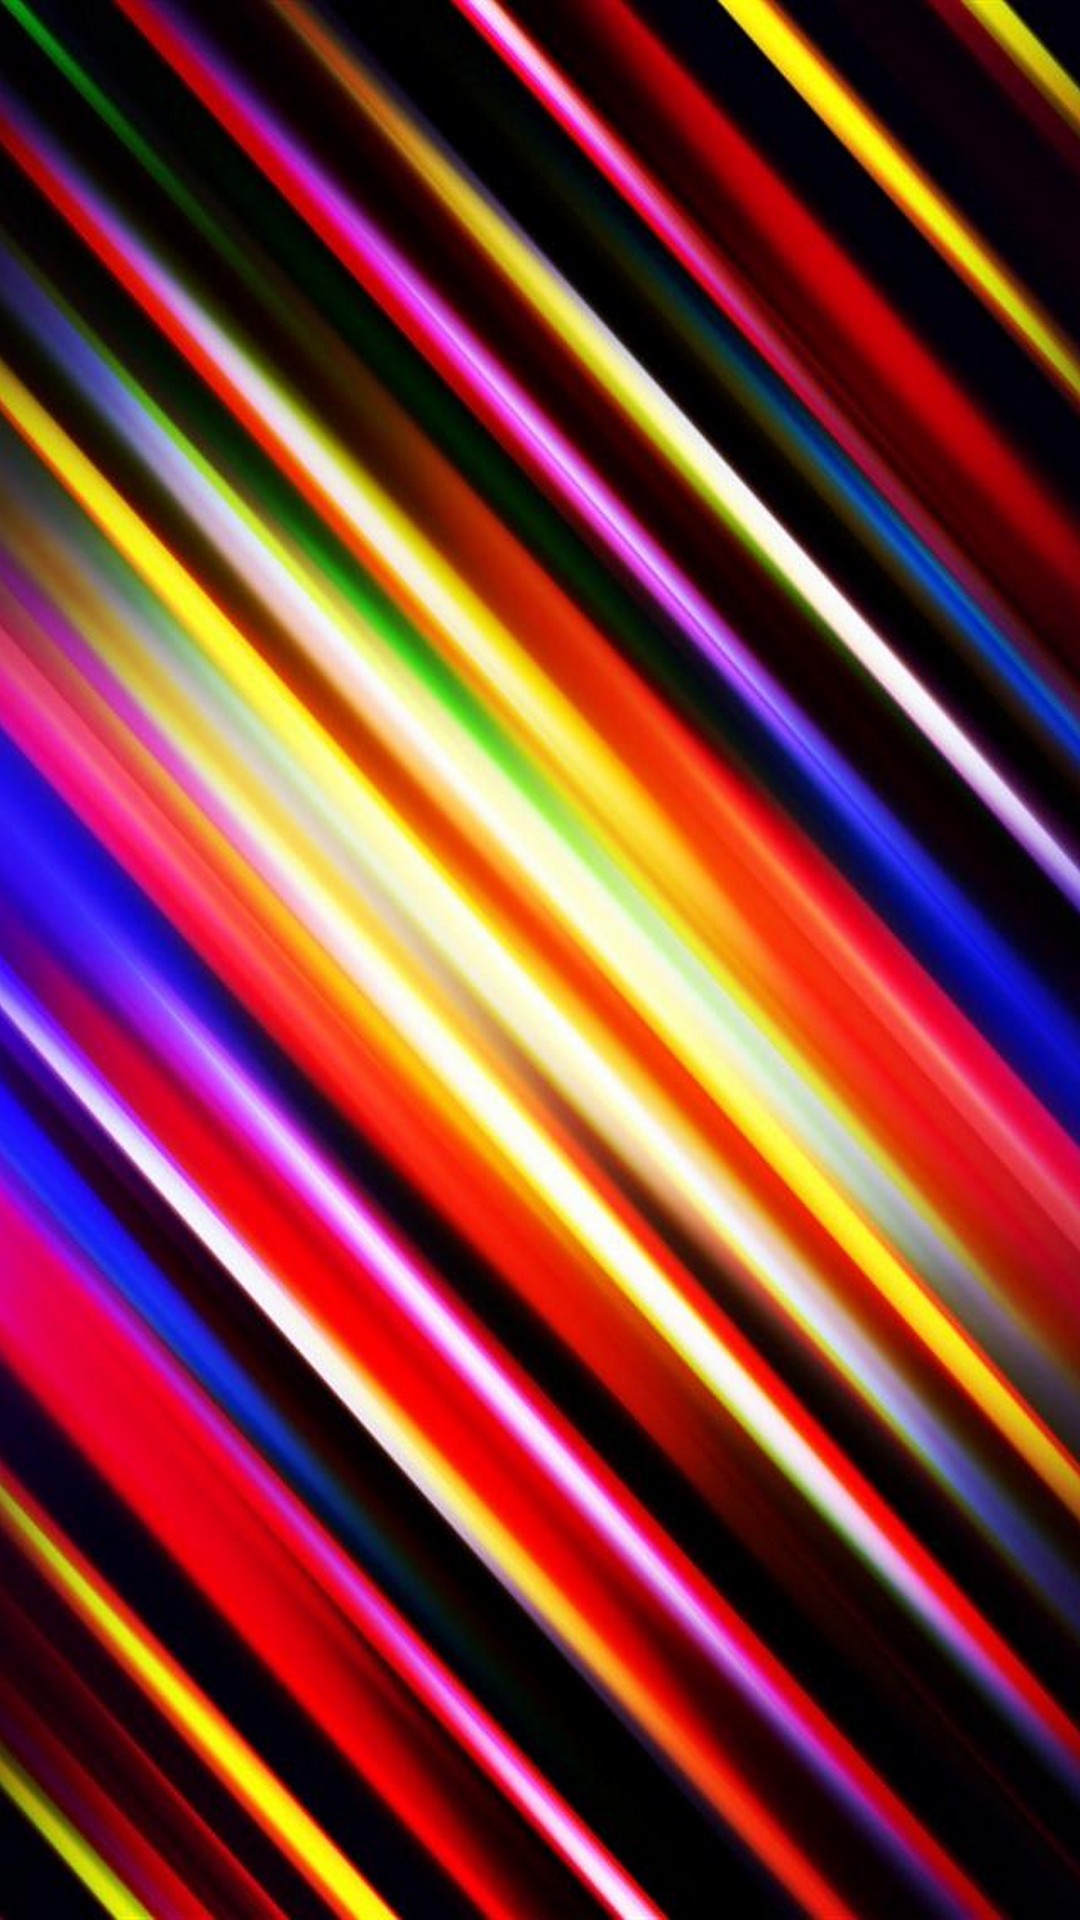 Dark Colorful iPhone 8 Wallpaper With high-resolution 1080X1920 pixel. You can use this wallpaper for your iPhone 5, 6, 7, 8, X, XS, XR backgrounds, Mobile Screensaver, or iPad Lock Screen